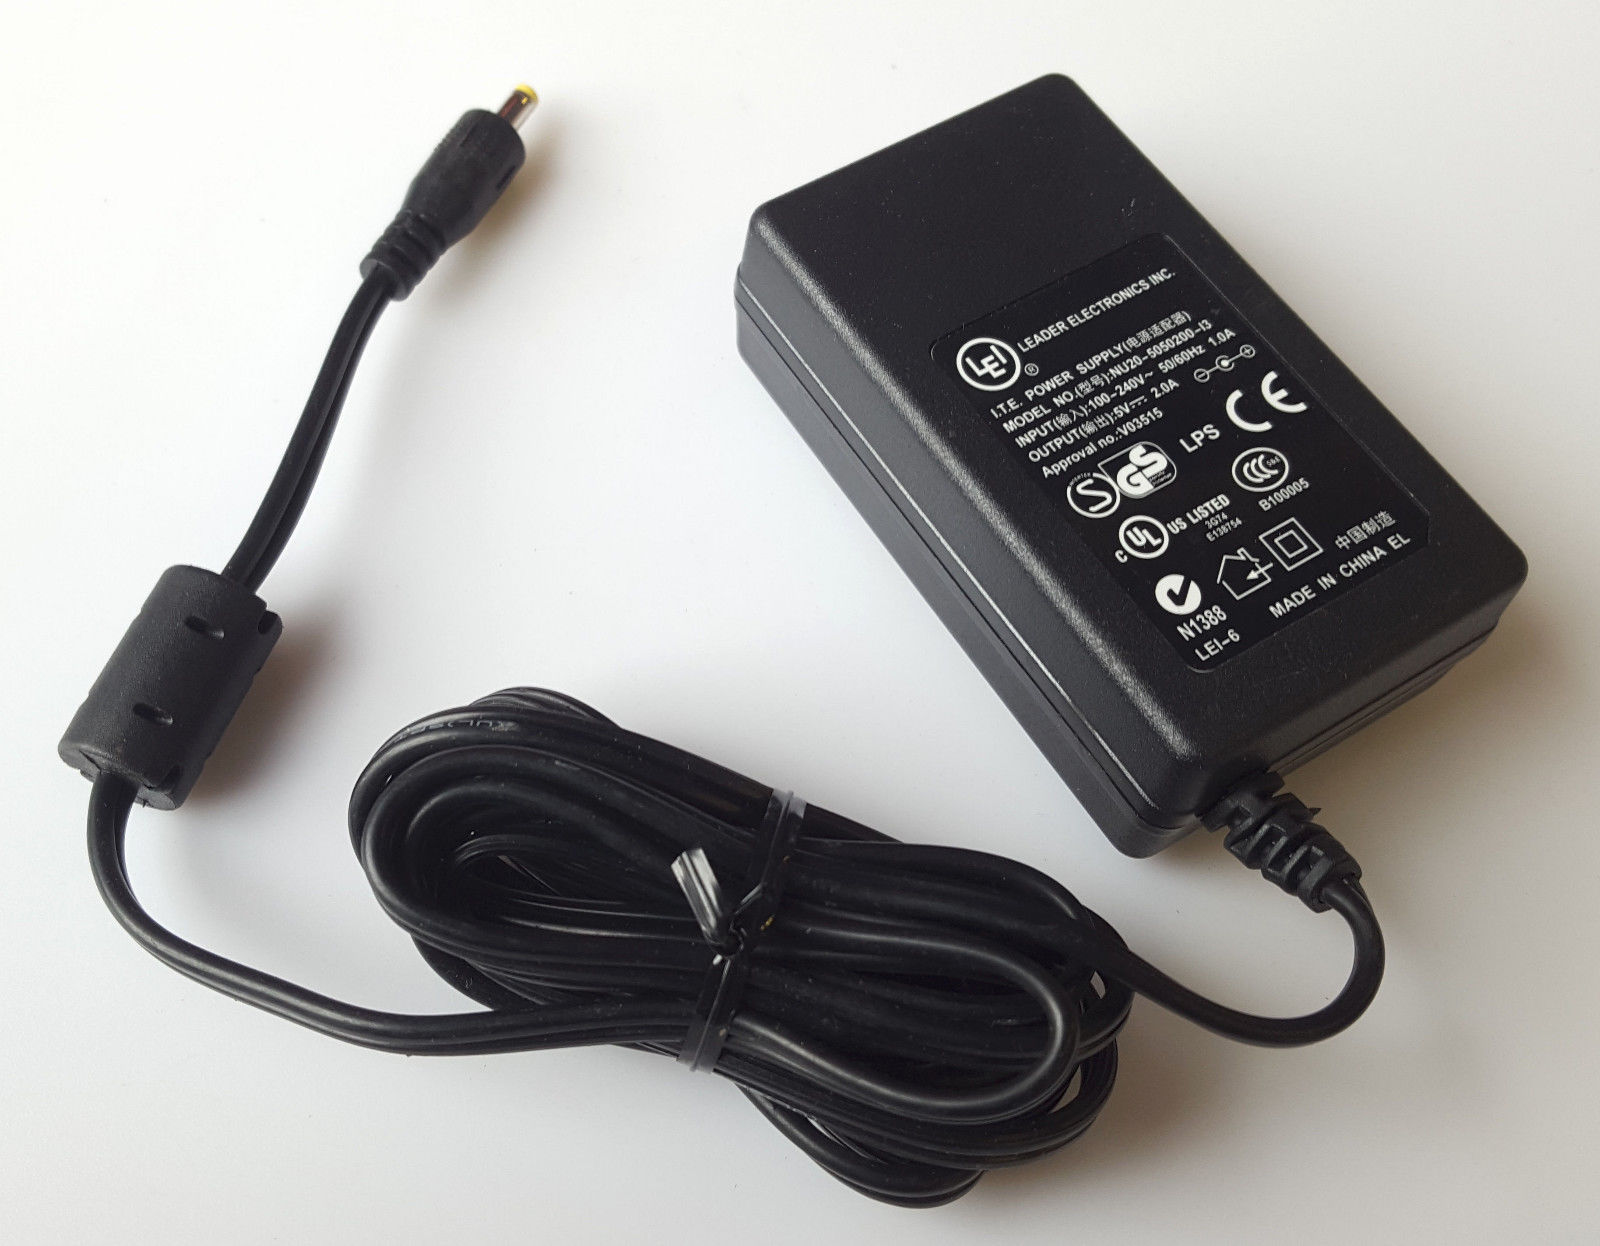 New 5V 2A LEI LEADER ELECTRONICS INC. NU20-5050200-I3 Power SUPPLY AC ADAPTER